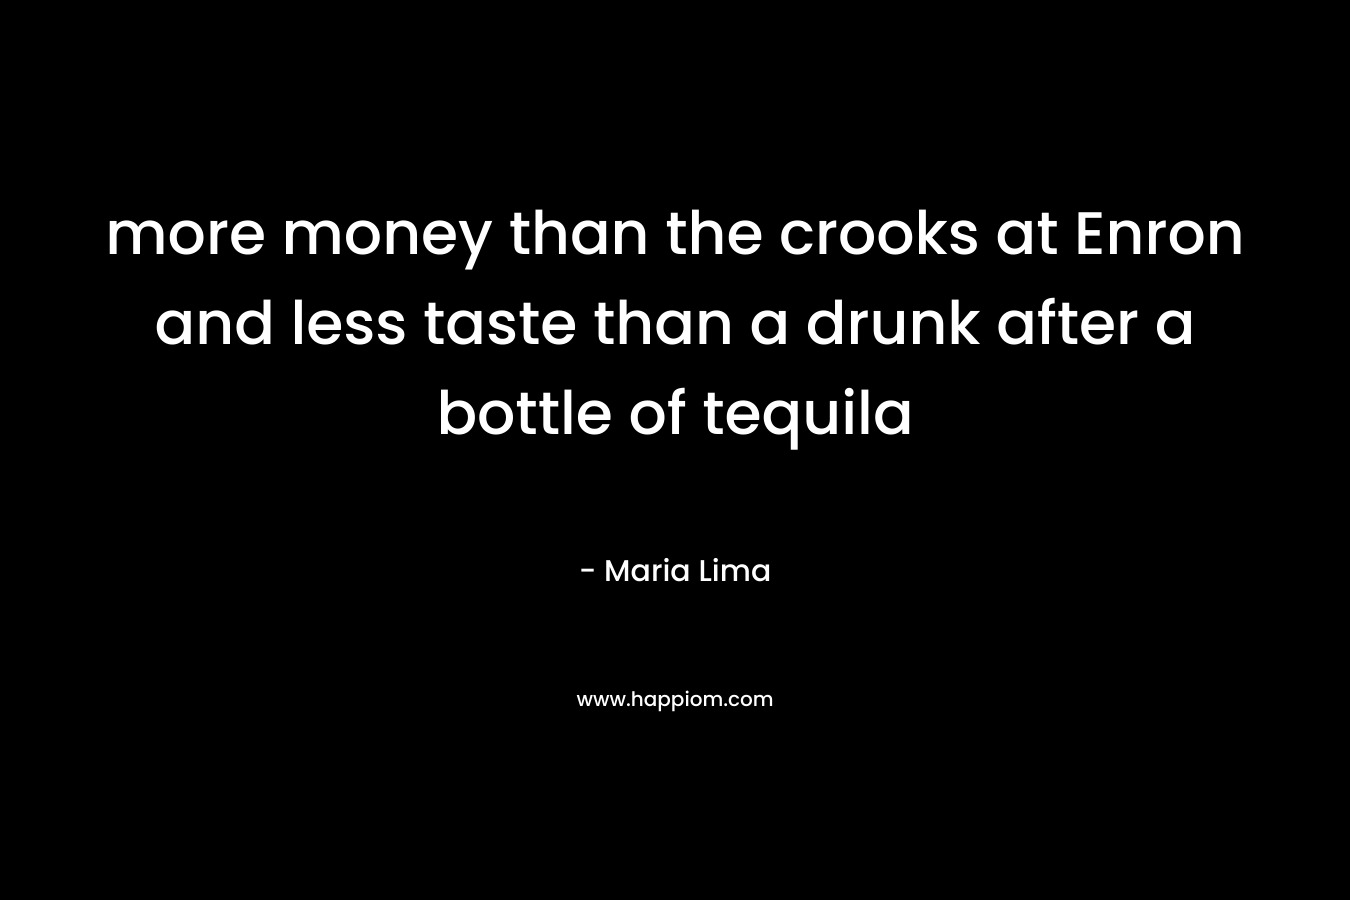 more money than the crooks at Enron and less taste than a drunk after a bottle of tequila – Maria Lima